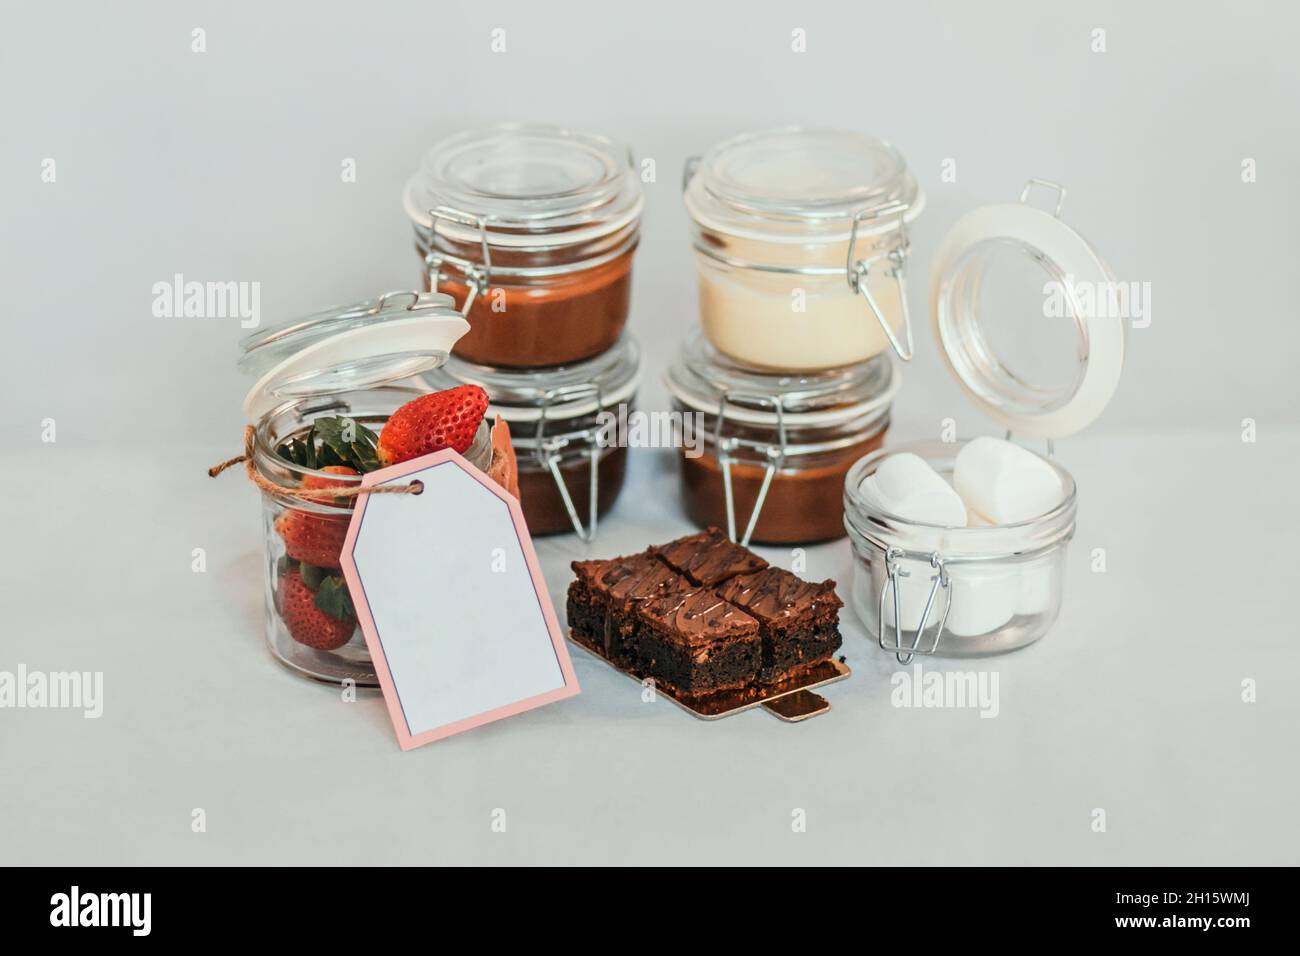 Opened transparent isolated jars with price tag and strawberry on table with sweet delicious dessert inside on white background Stock Photo